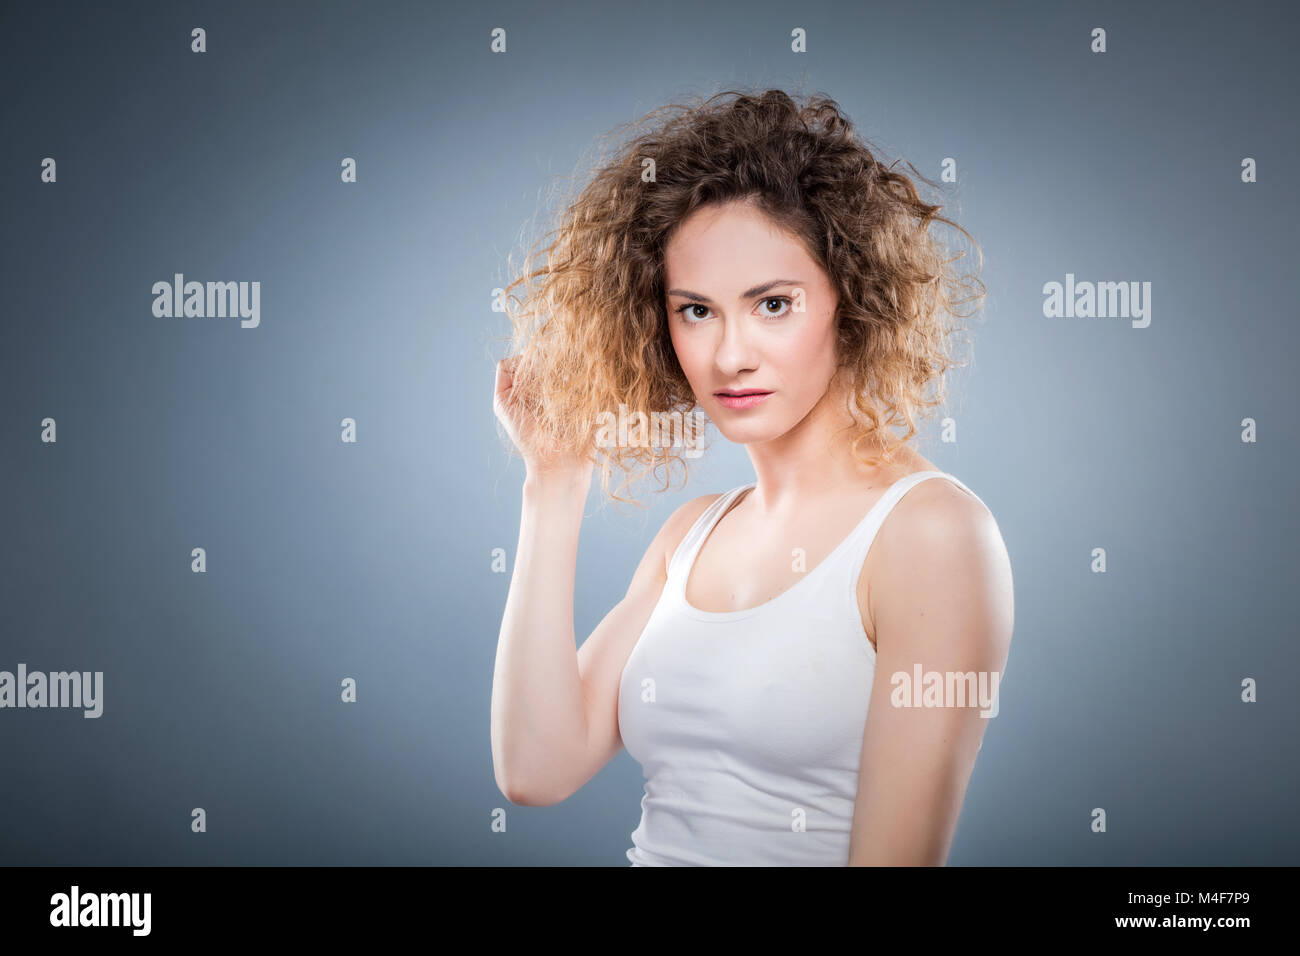 Portrait of a young girl with curly hair Stock Photo